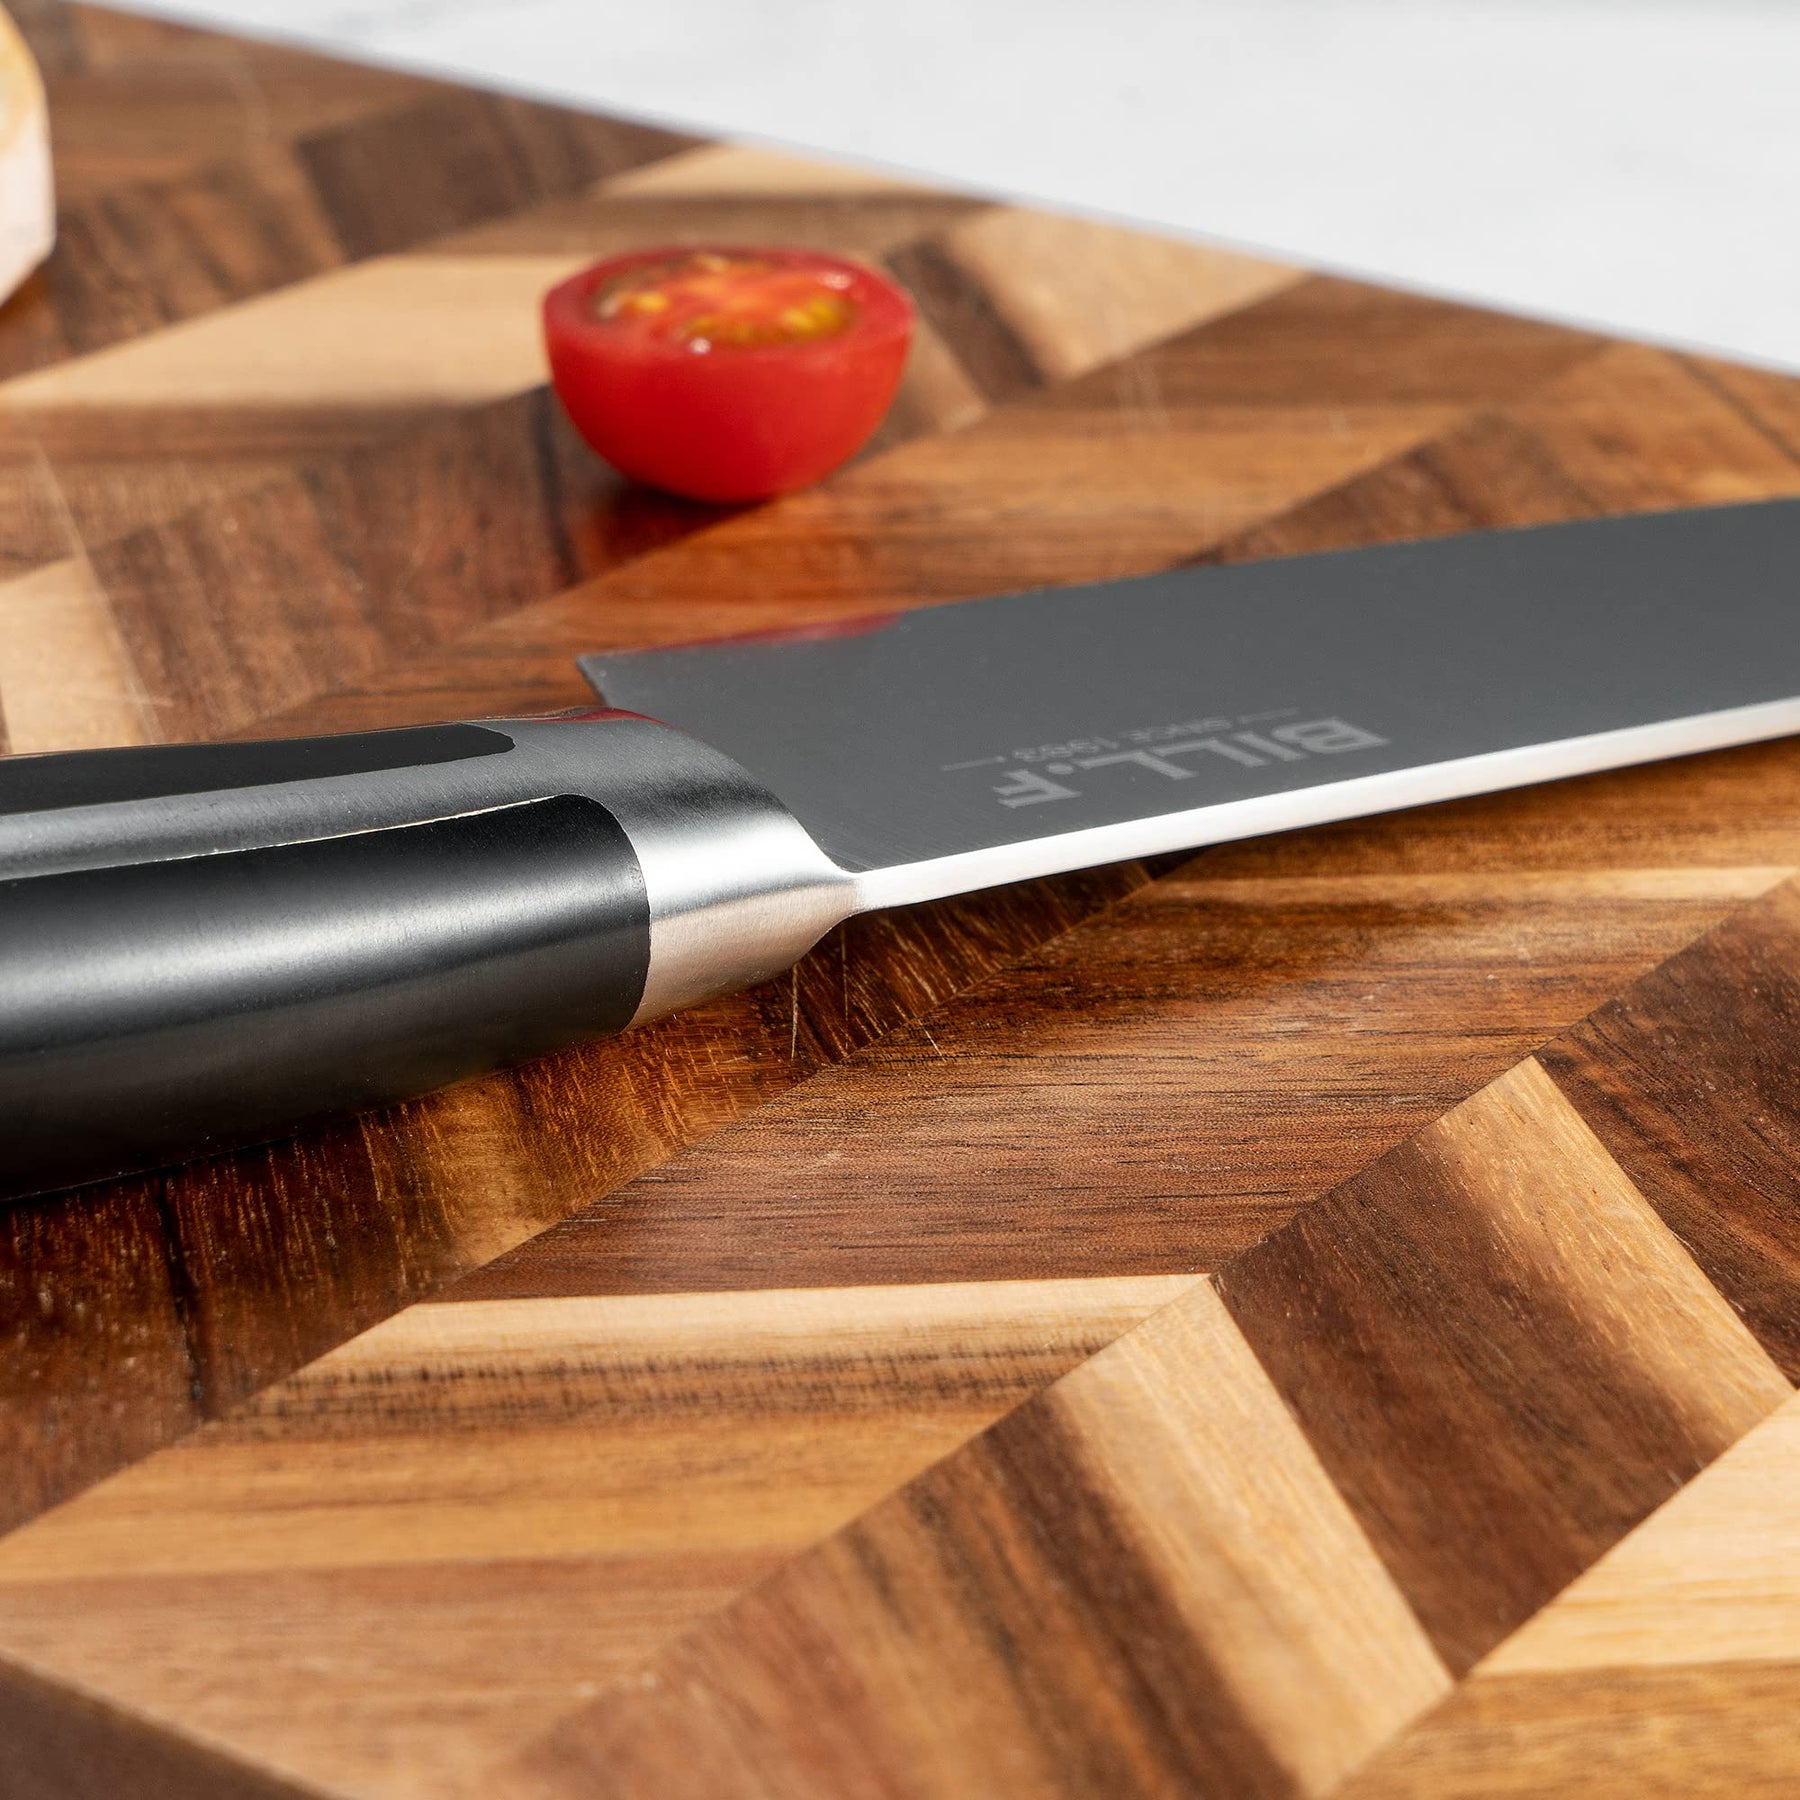 This 17-Piece Knife Set With 52,000+ 5-Star Reviews Is on Sale for $39